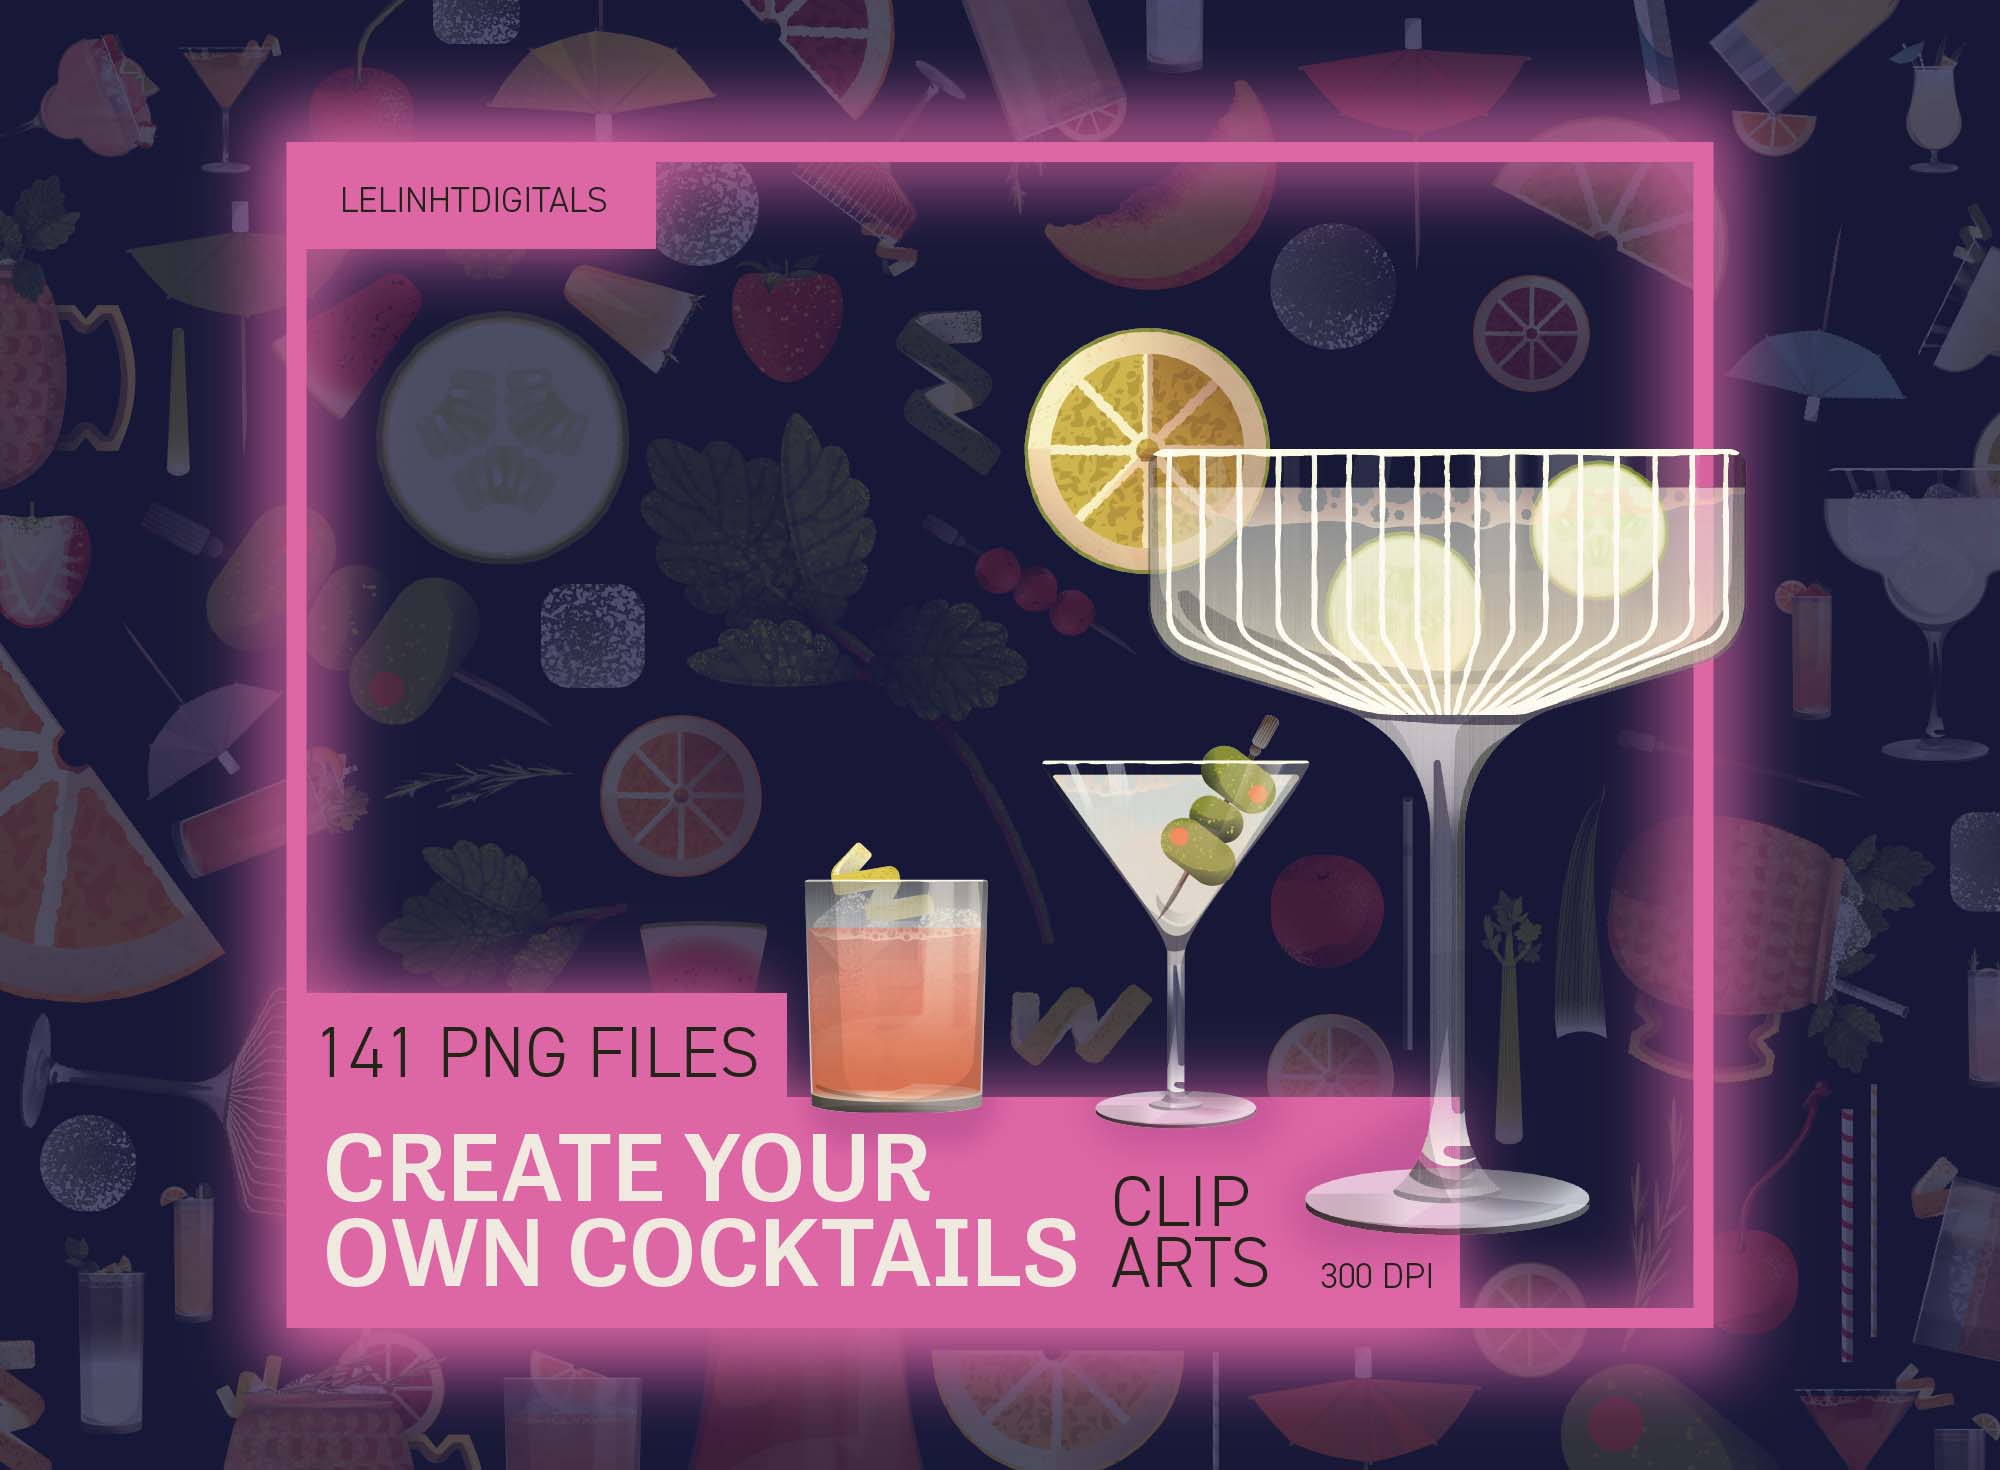 Create-Your-Own-Cocktails-PNG-listing-lelinhtdigitals_Feature-Image-clip-arts